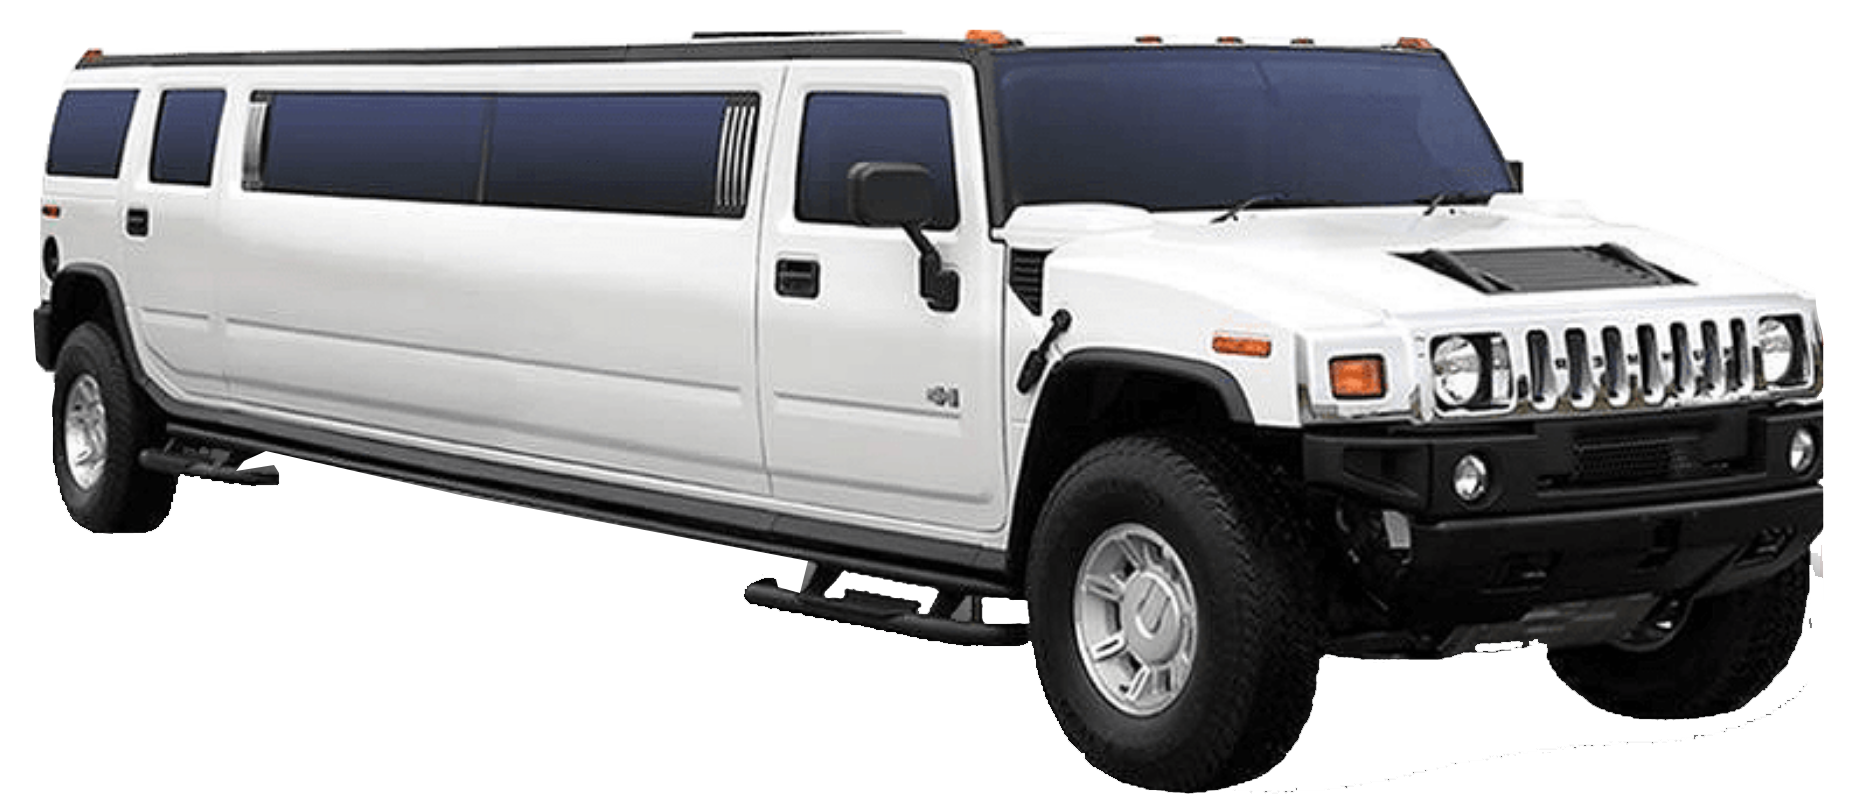 Hummer Limo White City Captain Transportation Wedding Quinceanera